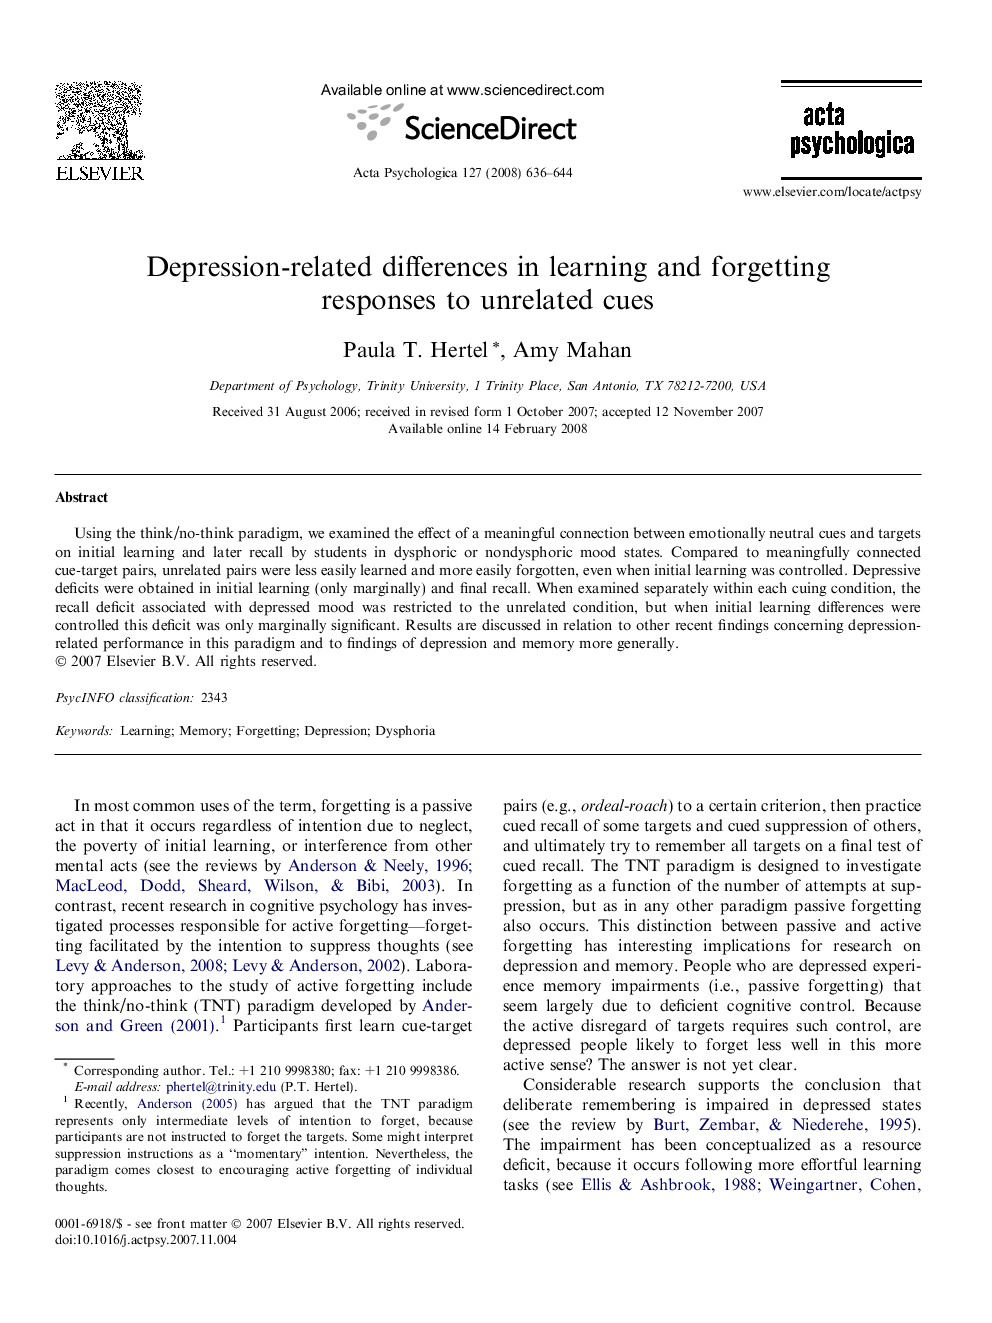 Depression-related differences in learning and forgetting responses to unrelated cues